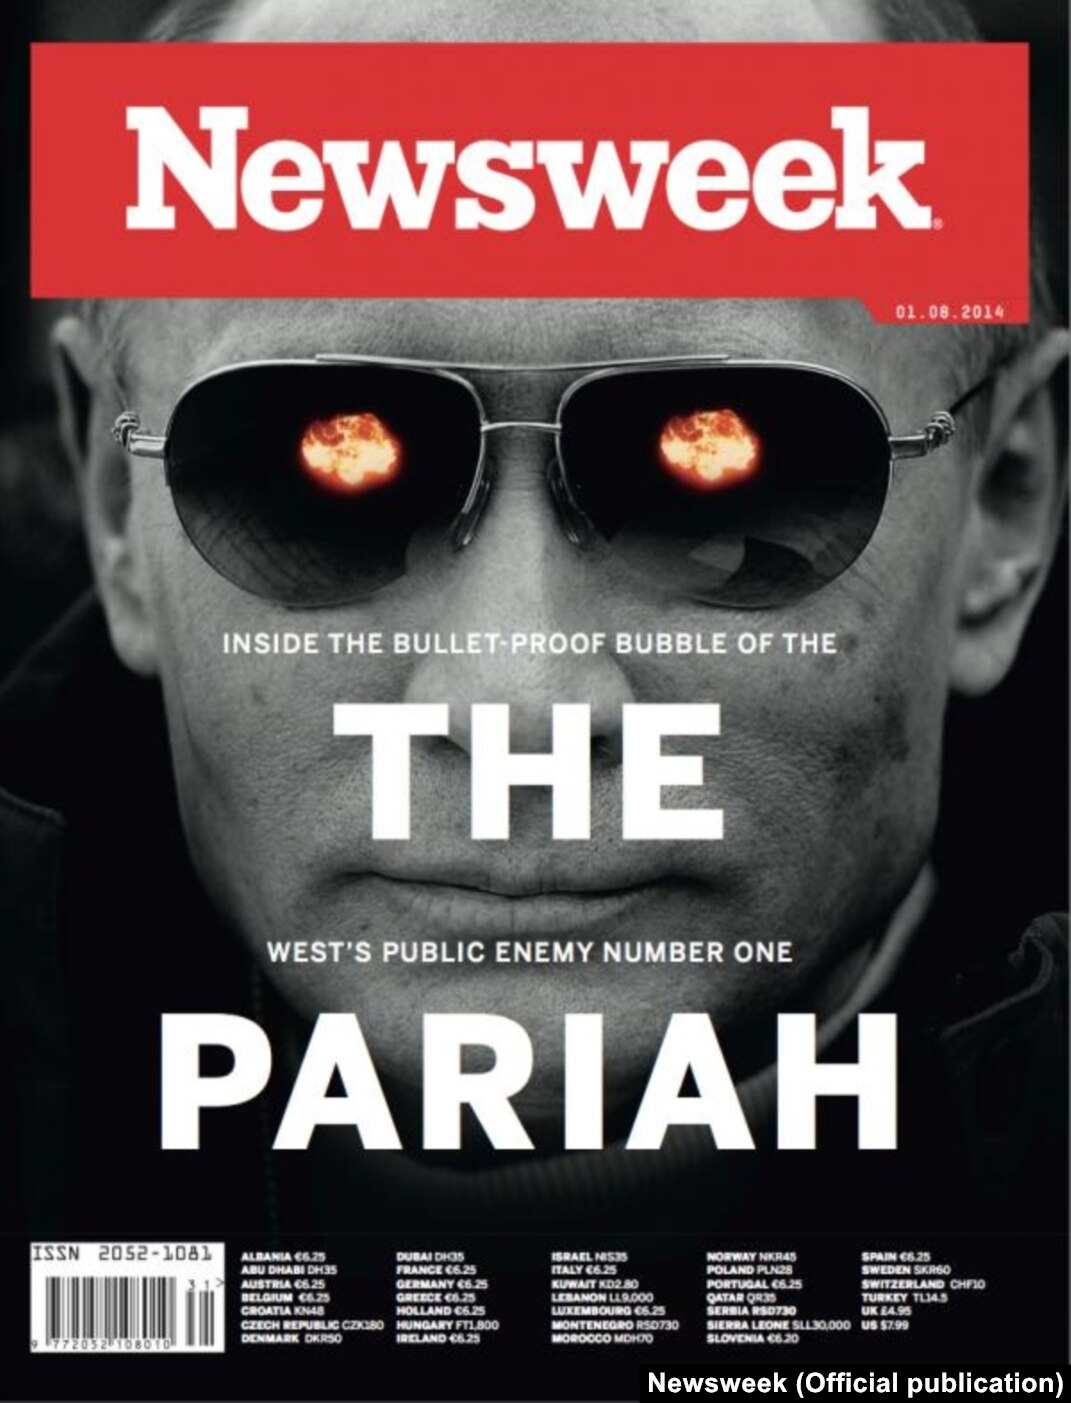 Pariah' Putin On Post-MH17 Cover Pages